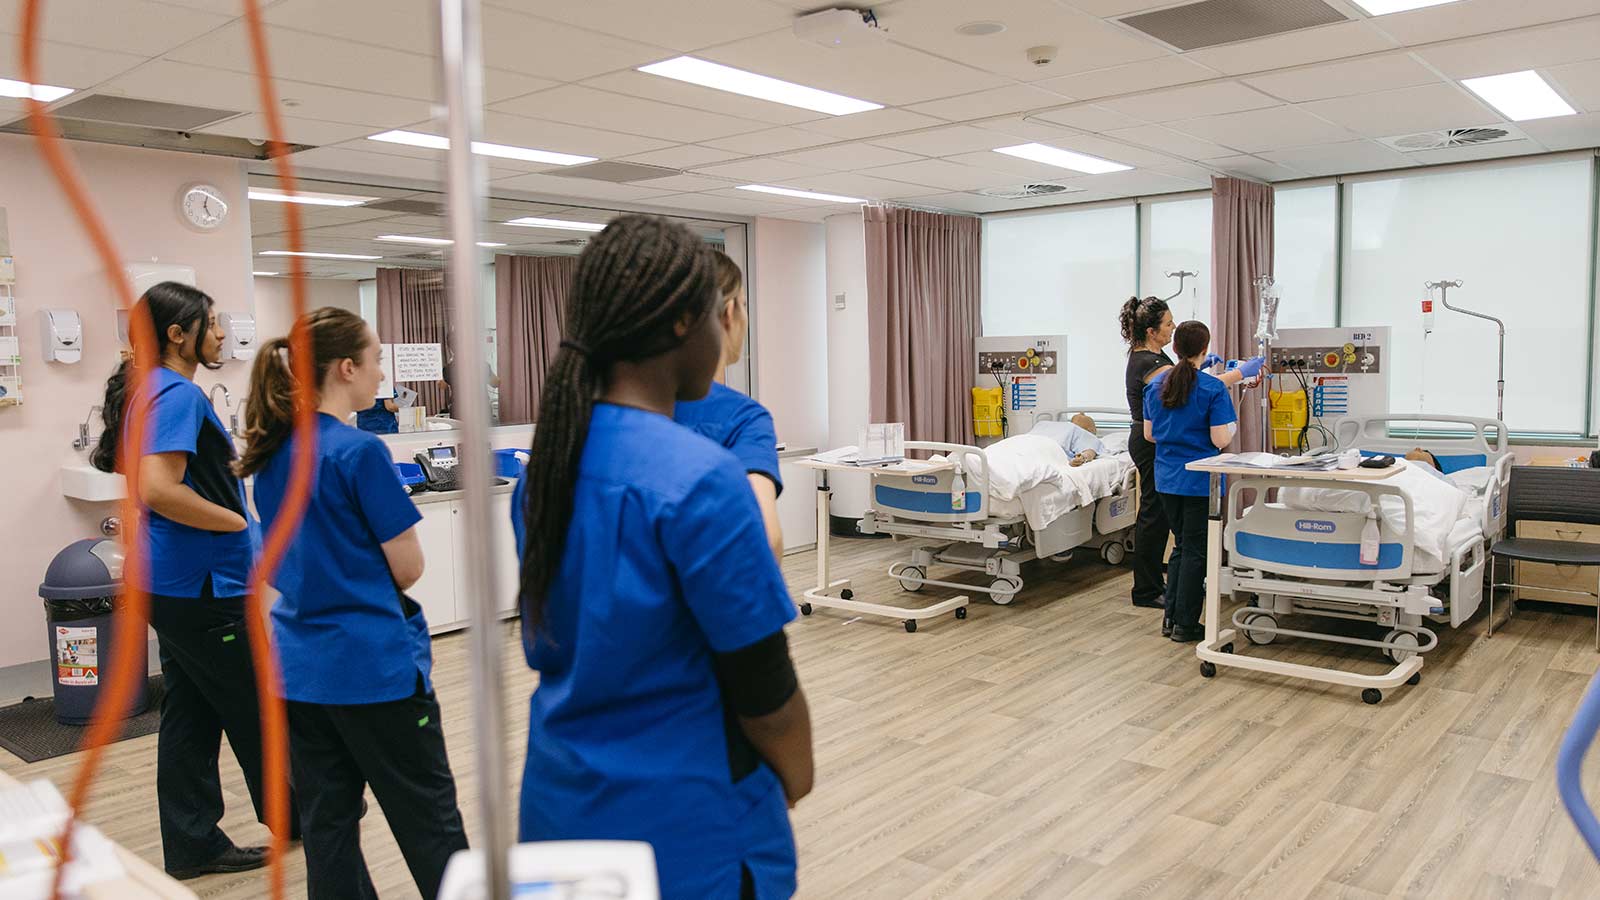 A group of nursing students are in a simulation lab at UOW watching a demonstration on a dummy patient. They are wearing dark blue UOW scrubs.